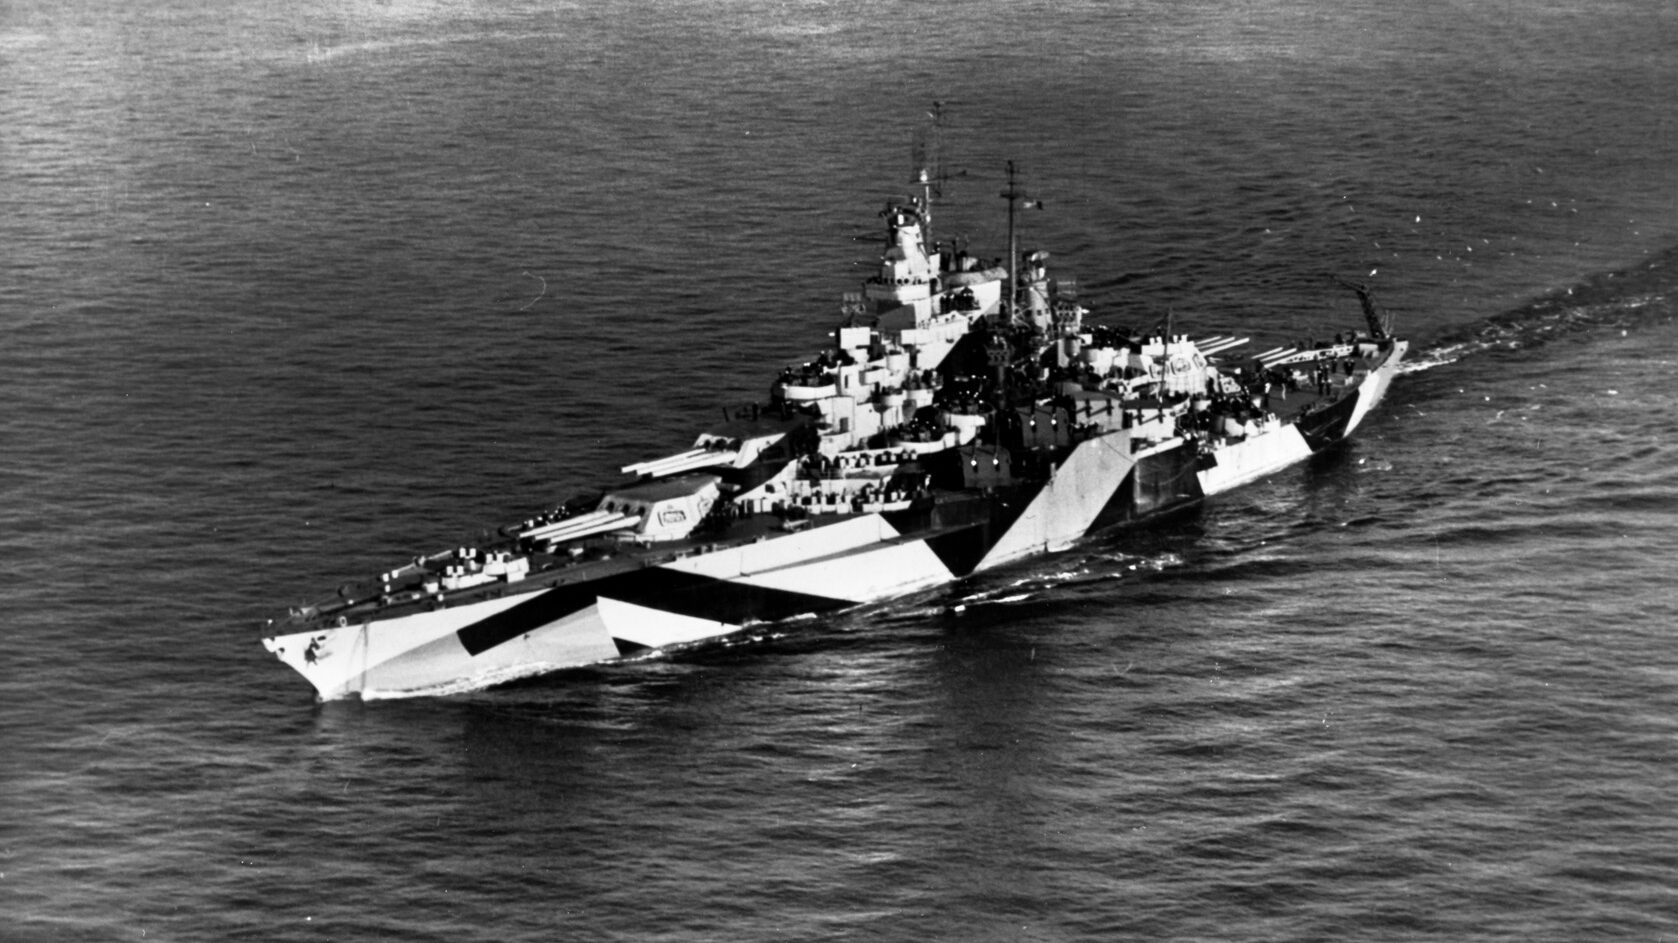 Painted in camouflage pattern Measure 32, Design 16-D, the repaired and modernized California steams at eight knots off the coast of Washington state on January 25, 1944. After returning to service, the battleship bombarded Japanese positions on several Pacific islands in support of amphibious landings.